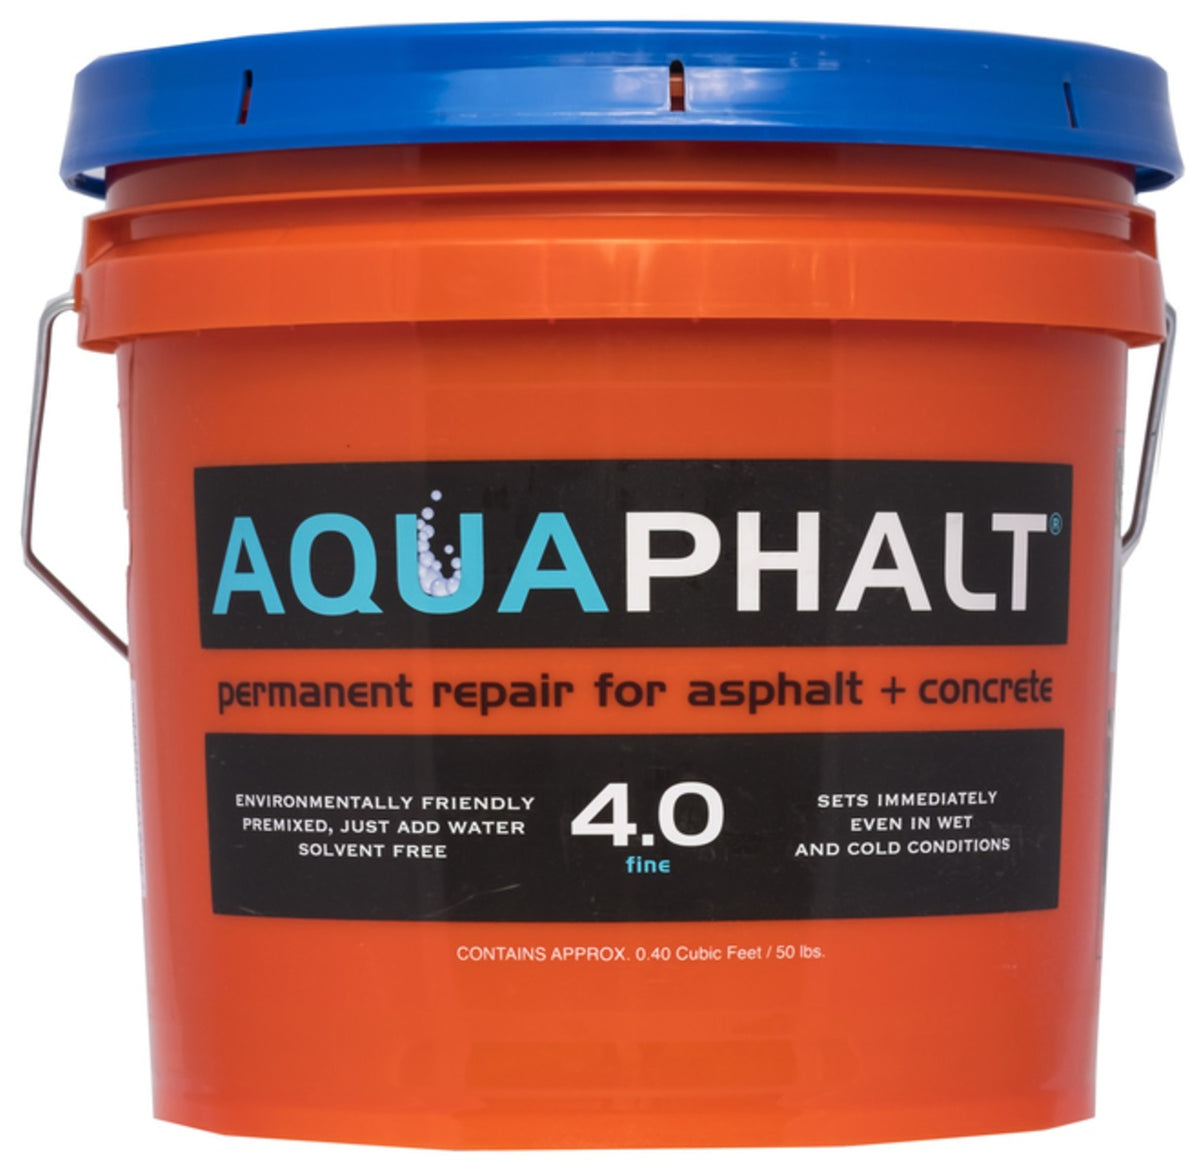 Buy aquaphalt 4.0 - Online store for roof & driveway, repair in USA, on sale, low price, discount deals, coupon code